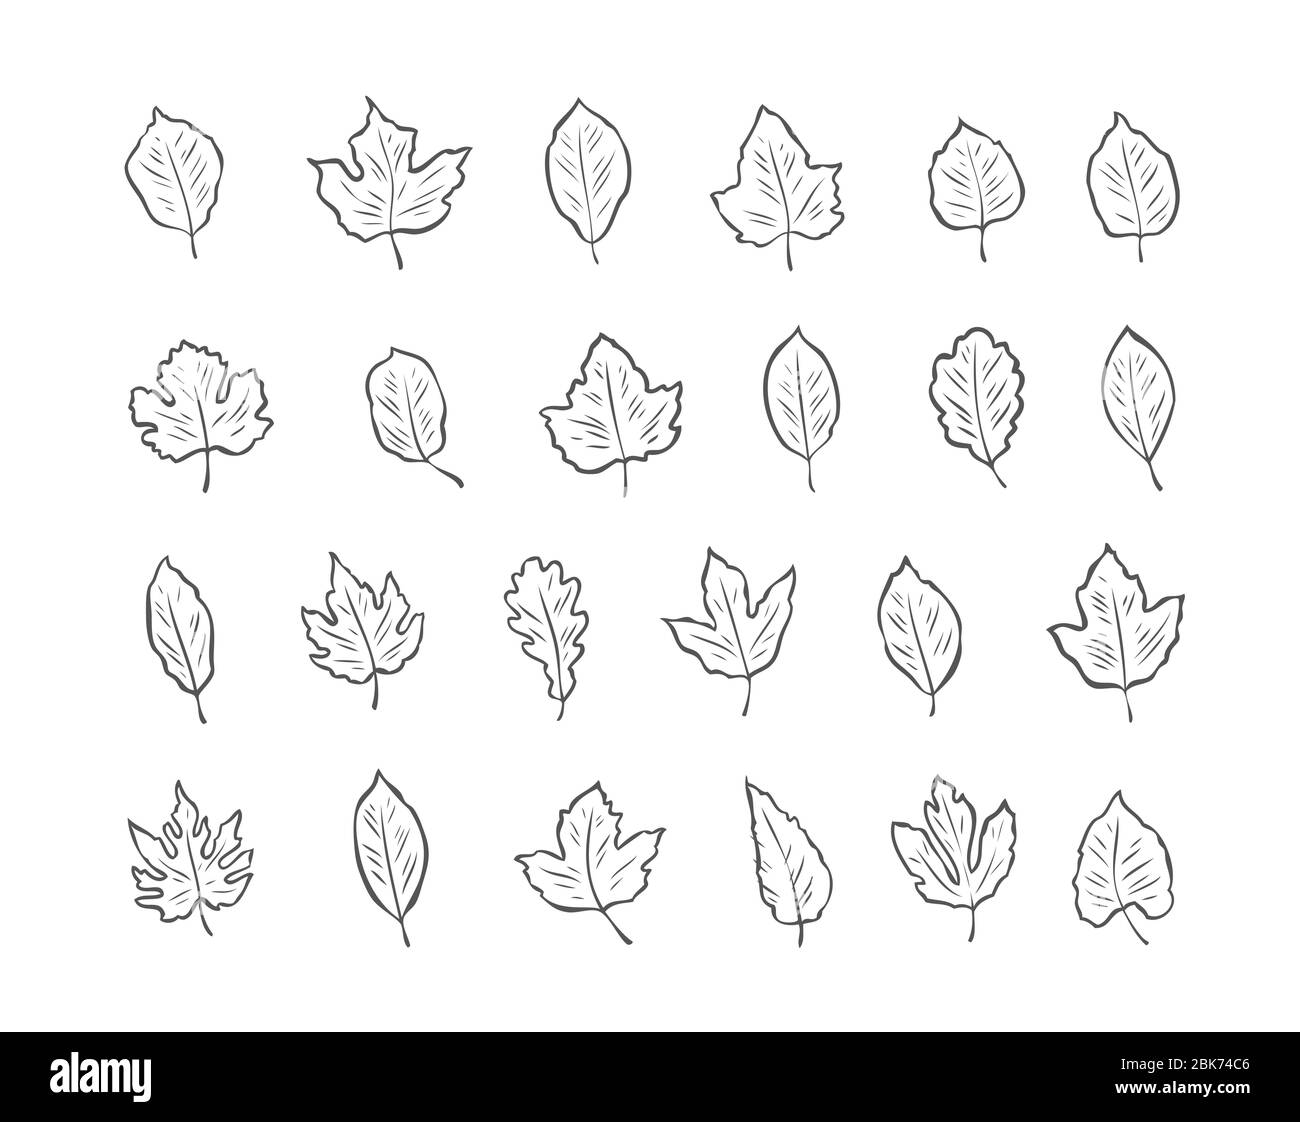 Leaves set sketch. Environment, nature vector illustration Stock Vector